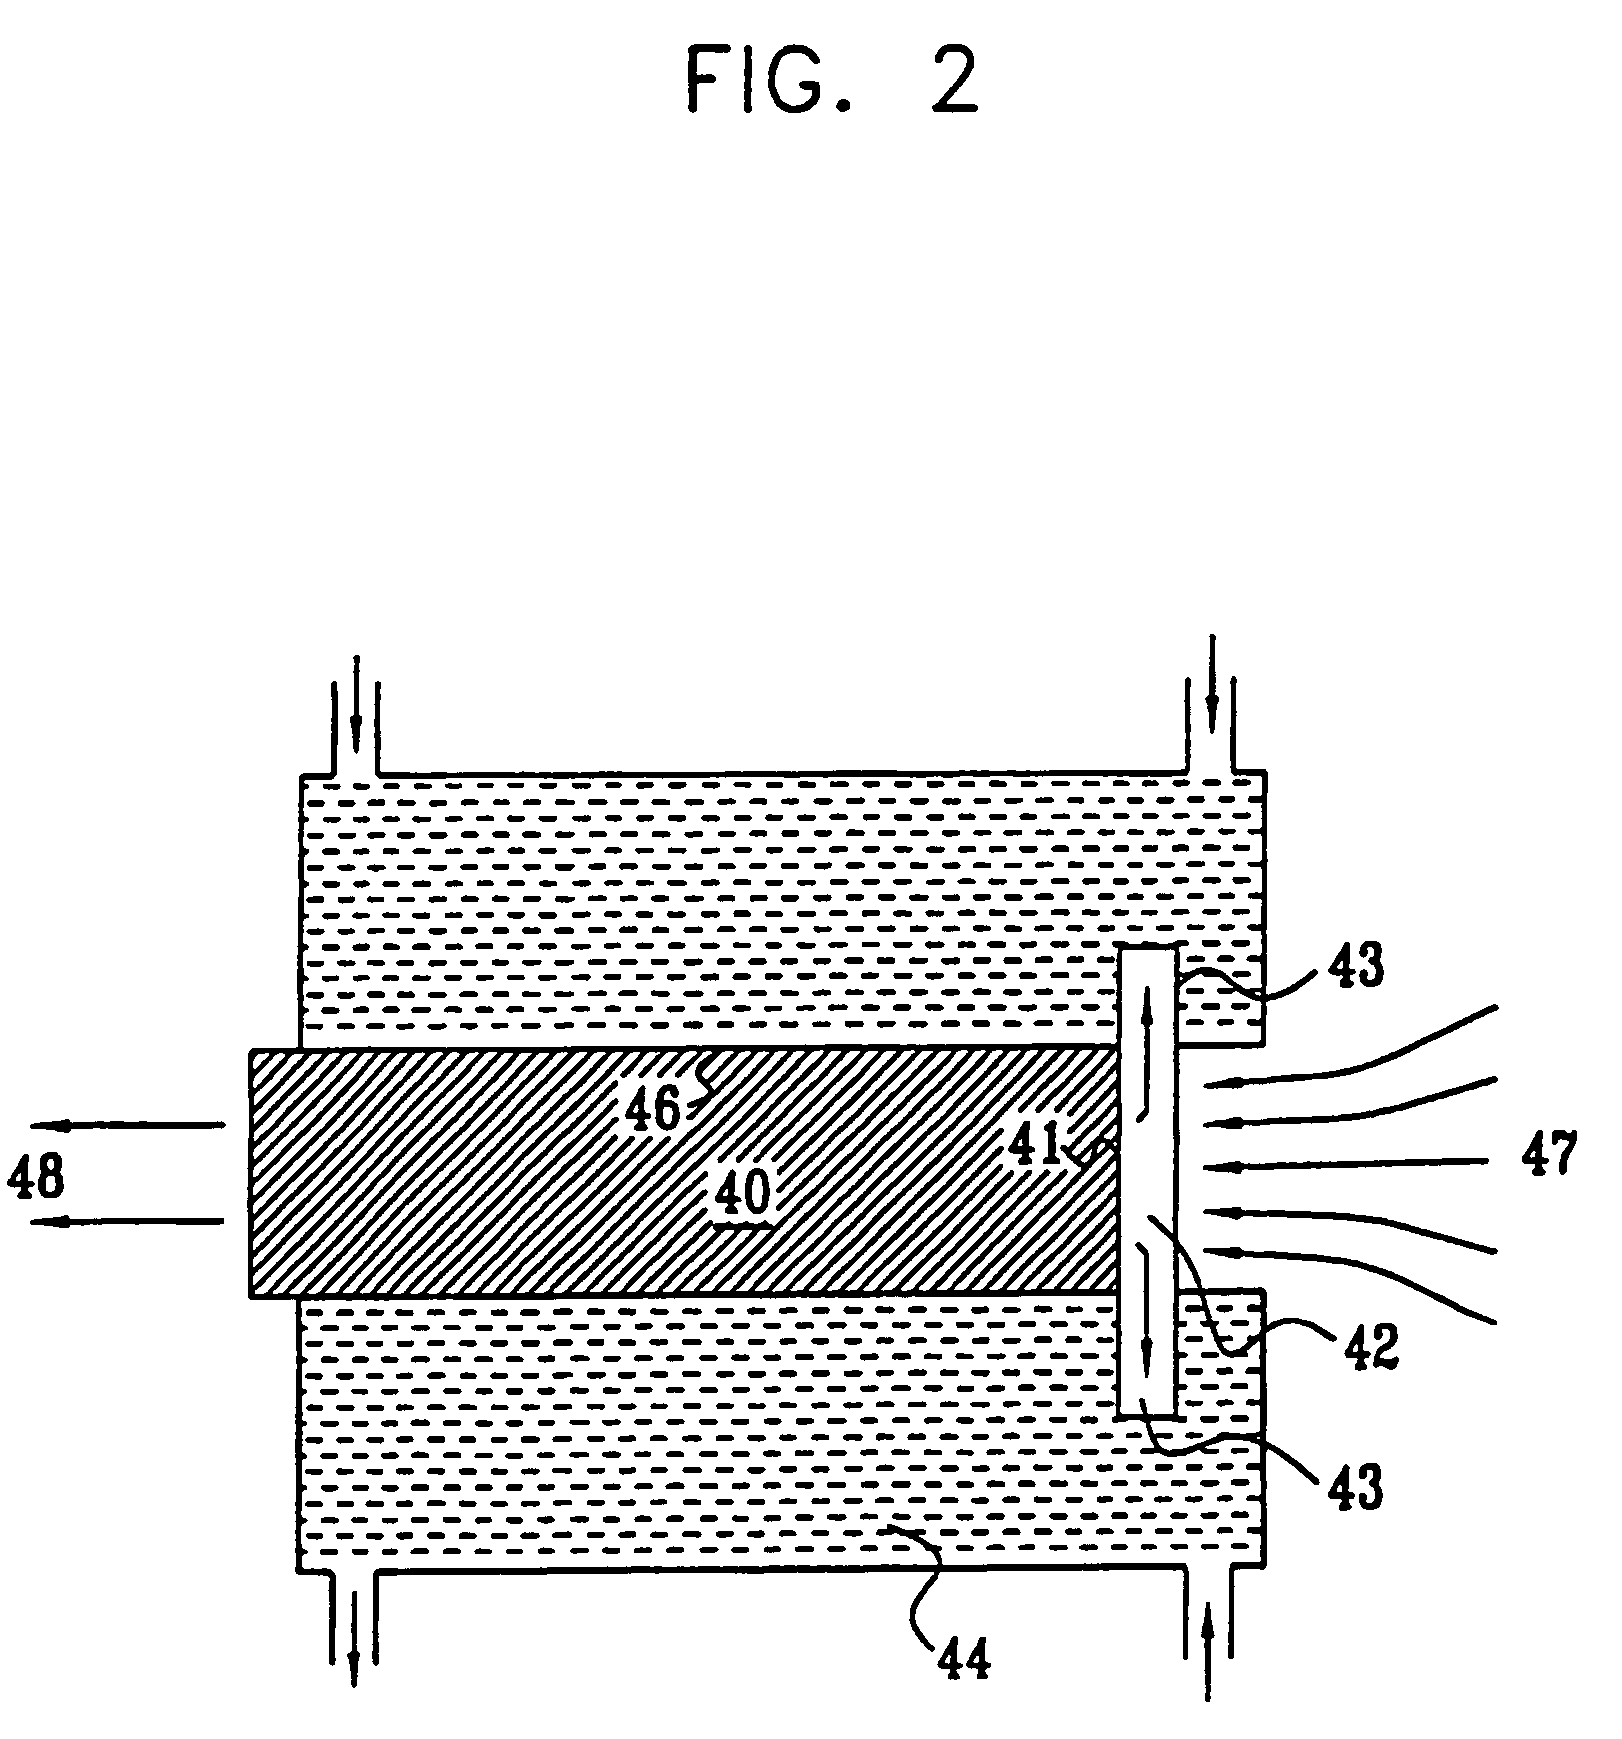 Diamond-cooled solid-state laser